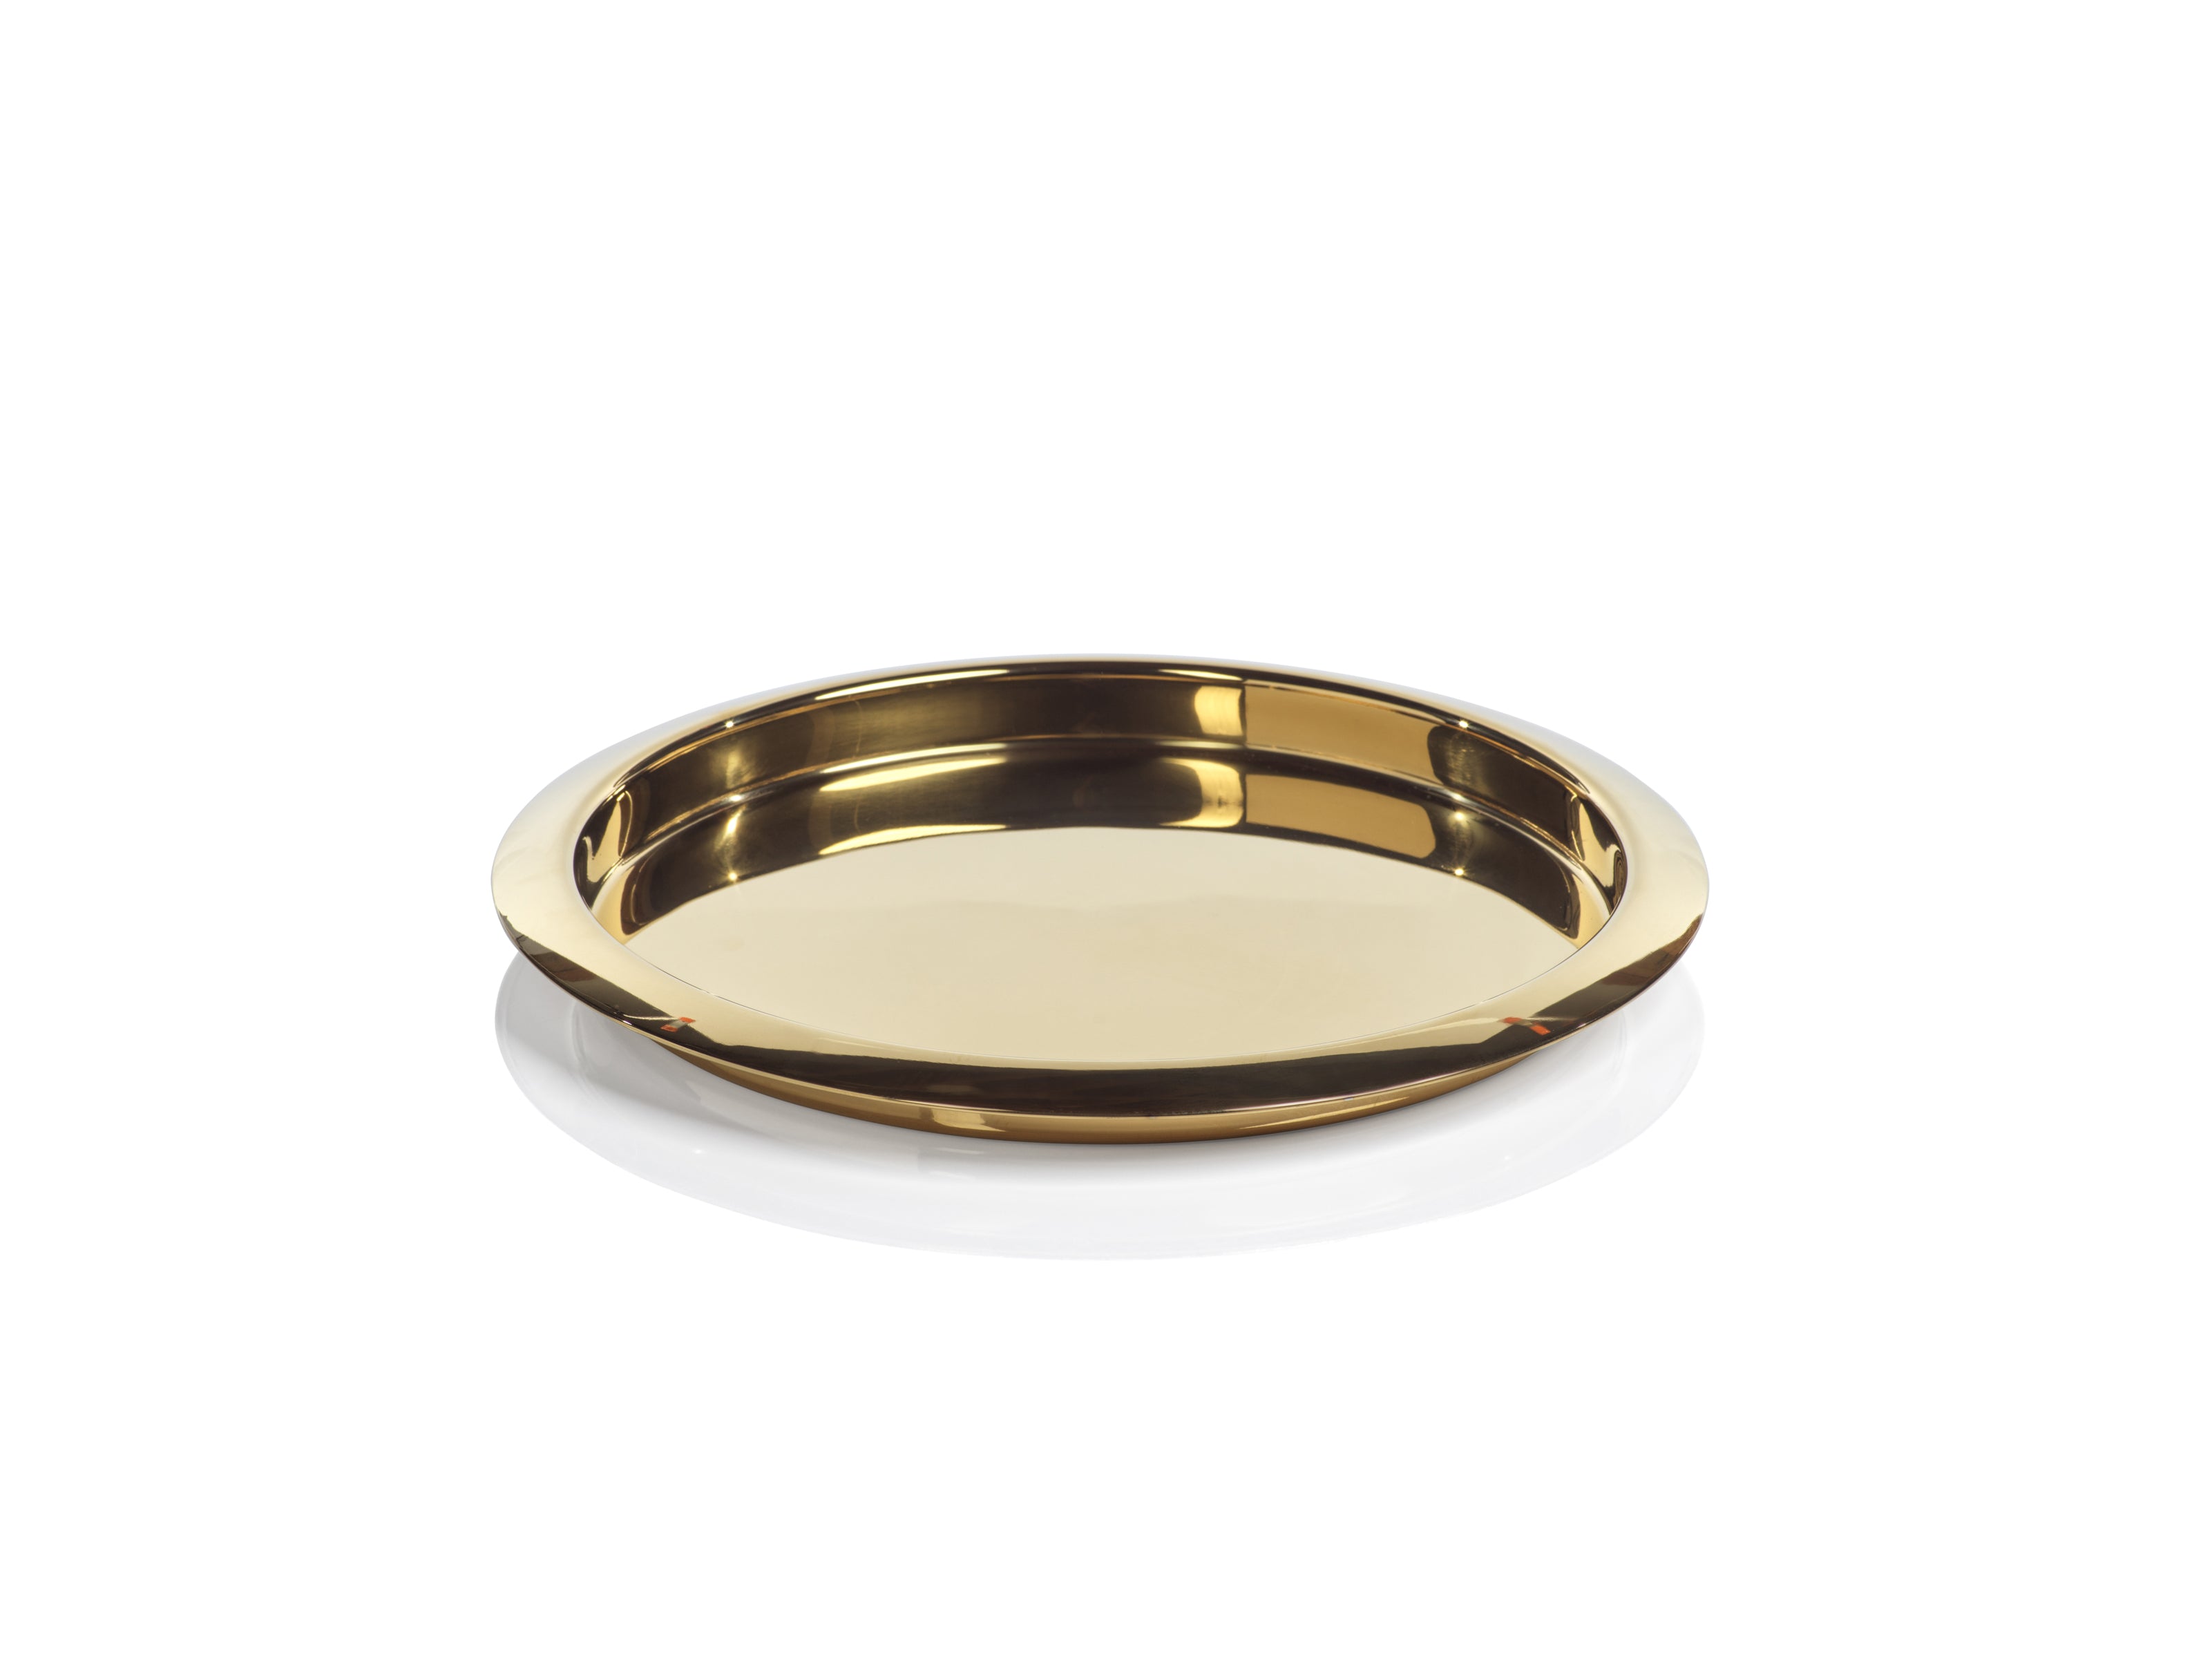 Stainless Steel Gold Round Serving Tray - CARLYLE AVENUE